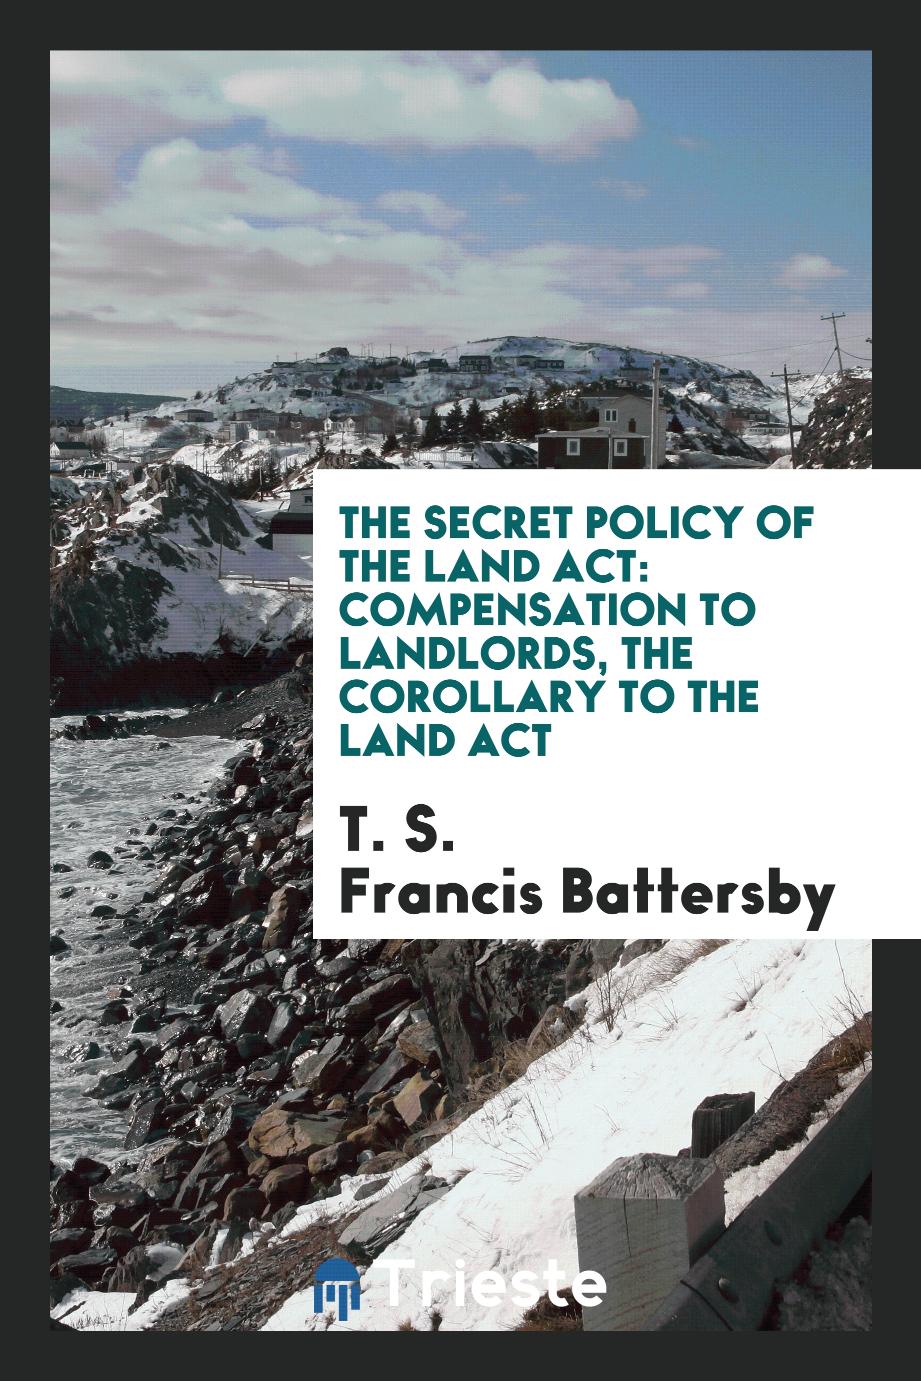 The Secret Policy of the Land Act: Compensation to Landlords, the Corollary to the Land Act